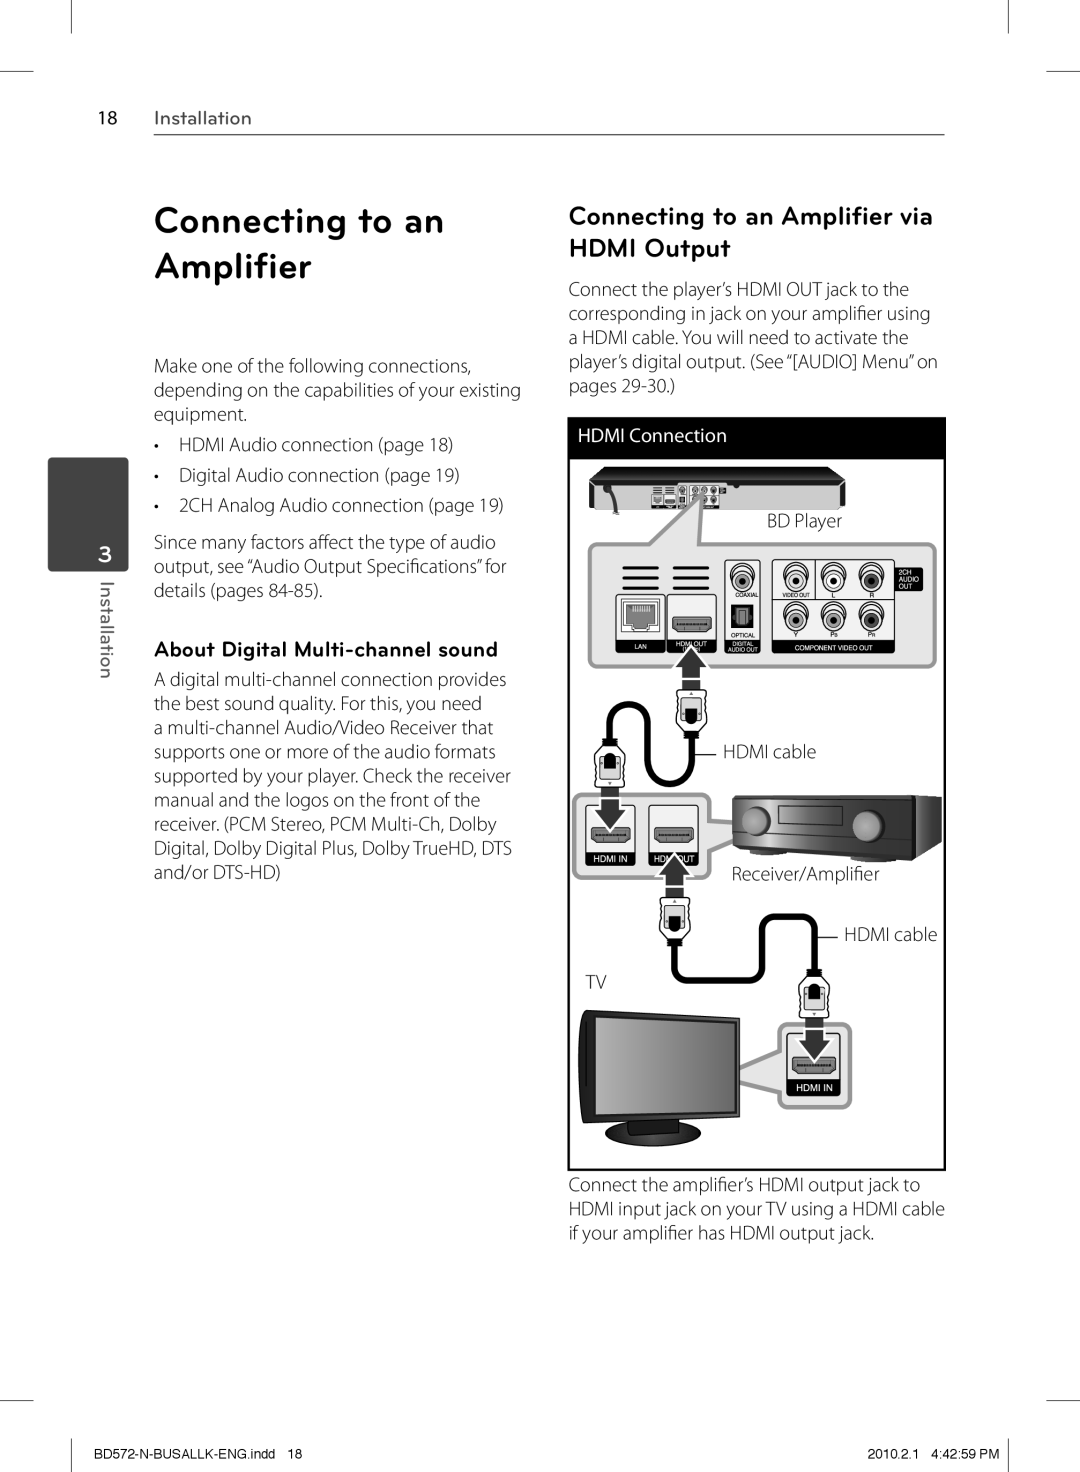 LG Electronics BD570 Connecting to an Ampliﬁer via HDMI Output, About Digital Multi-channel sound, Installation 